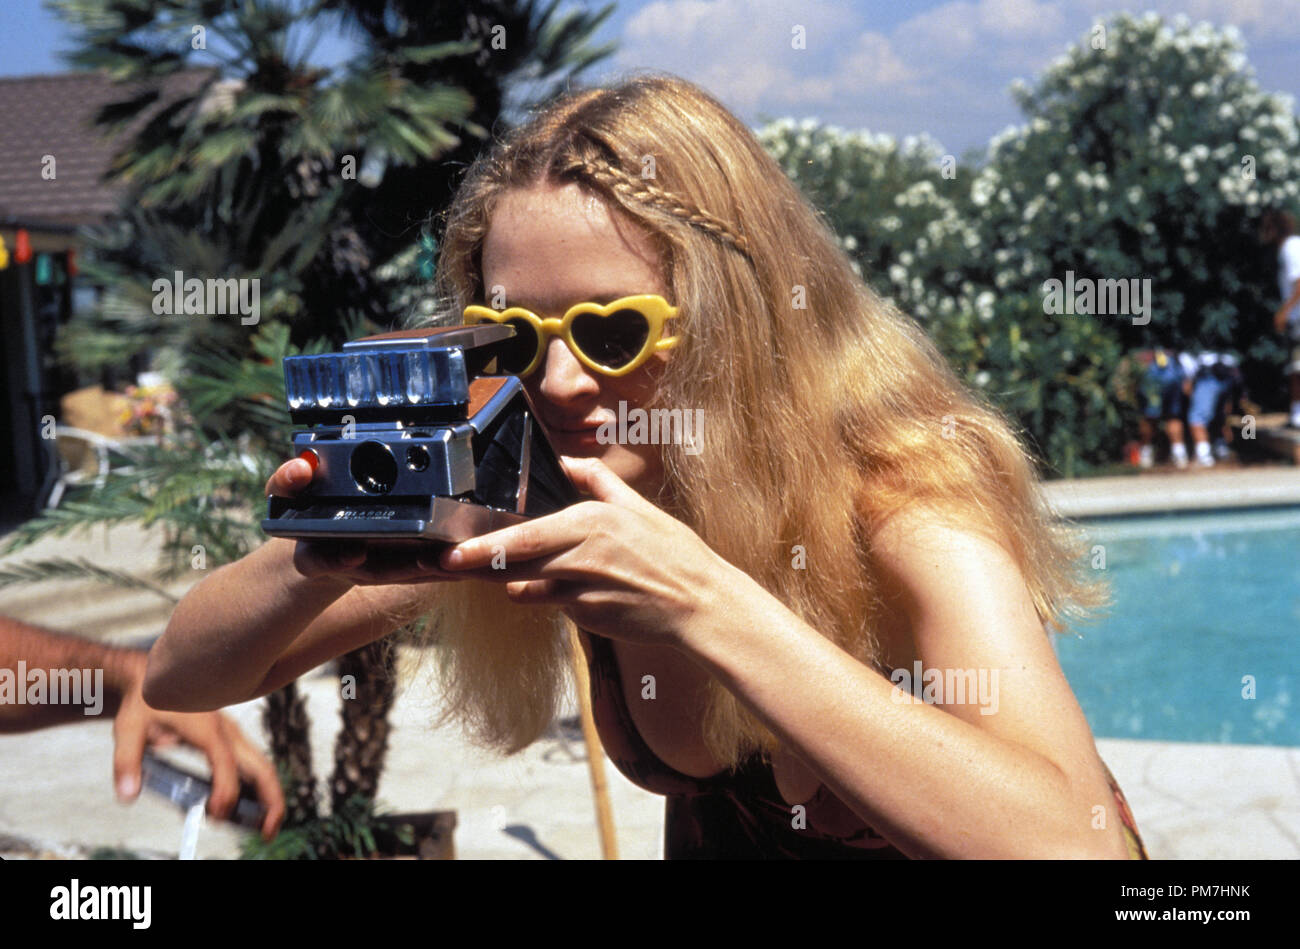 Film Still from 'Boogie Nights' Heather Graham © 1997 New Line Cinema Photo Credit: G. Lefkowitz  File Reference # 31013418THA  For Editorial Use Only - All Rights Reserved Stock Photo